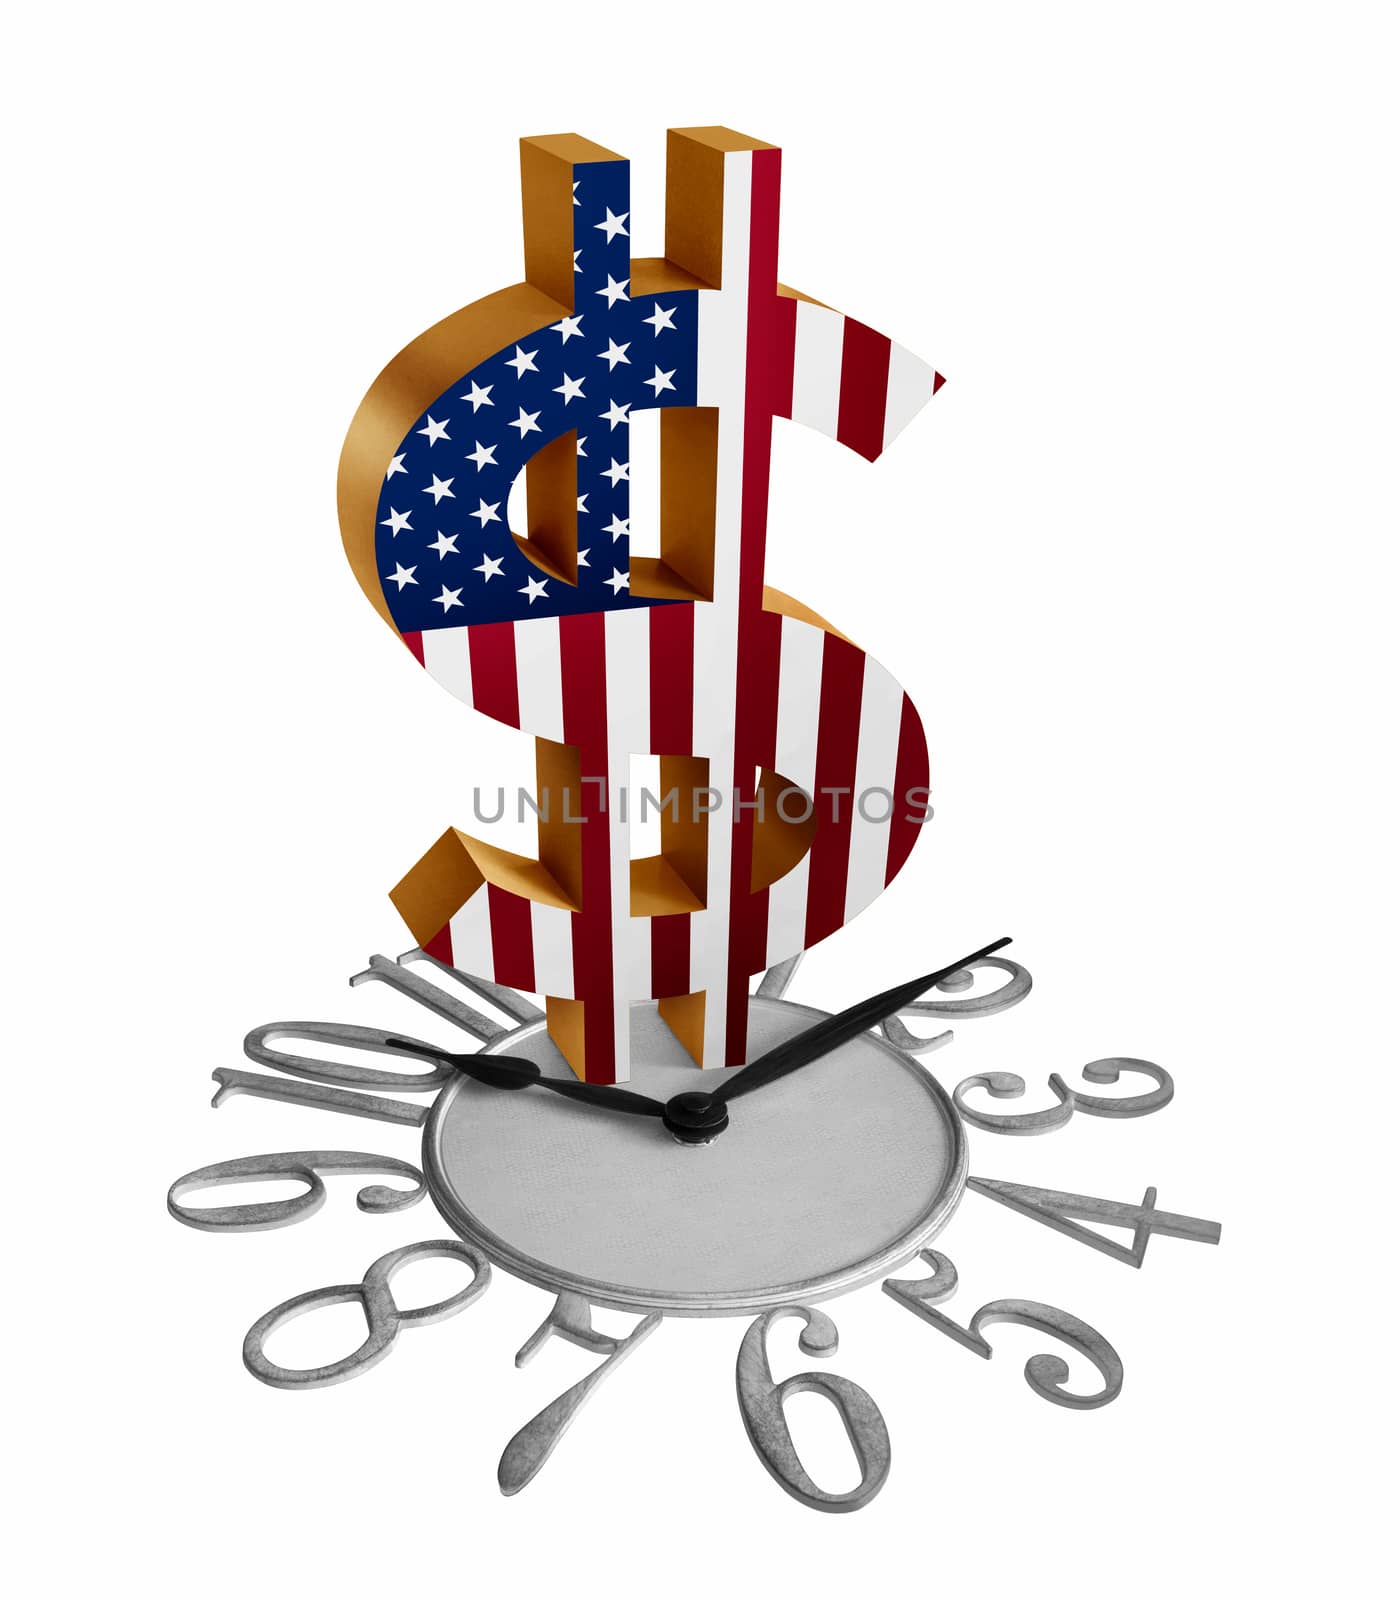 US Dollar Sign with the US Flag on a clock by igorot